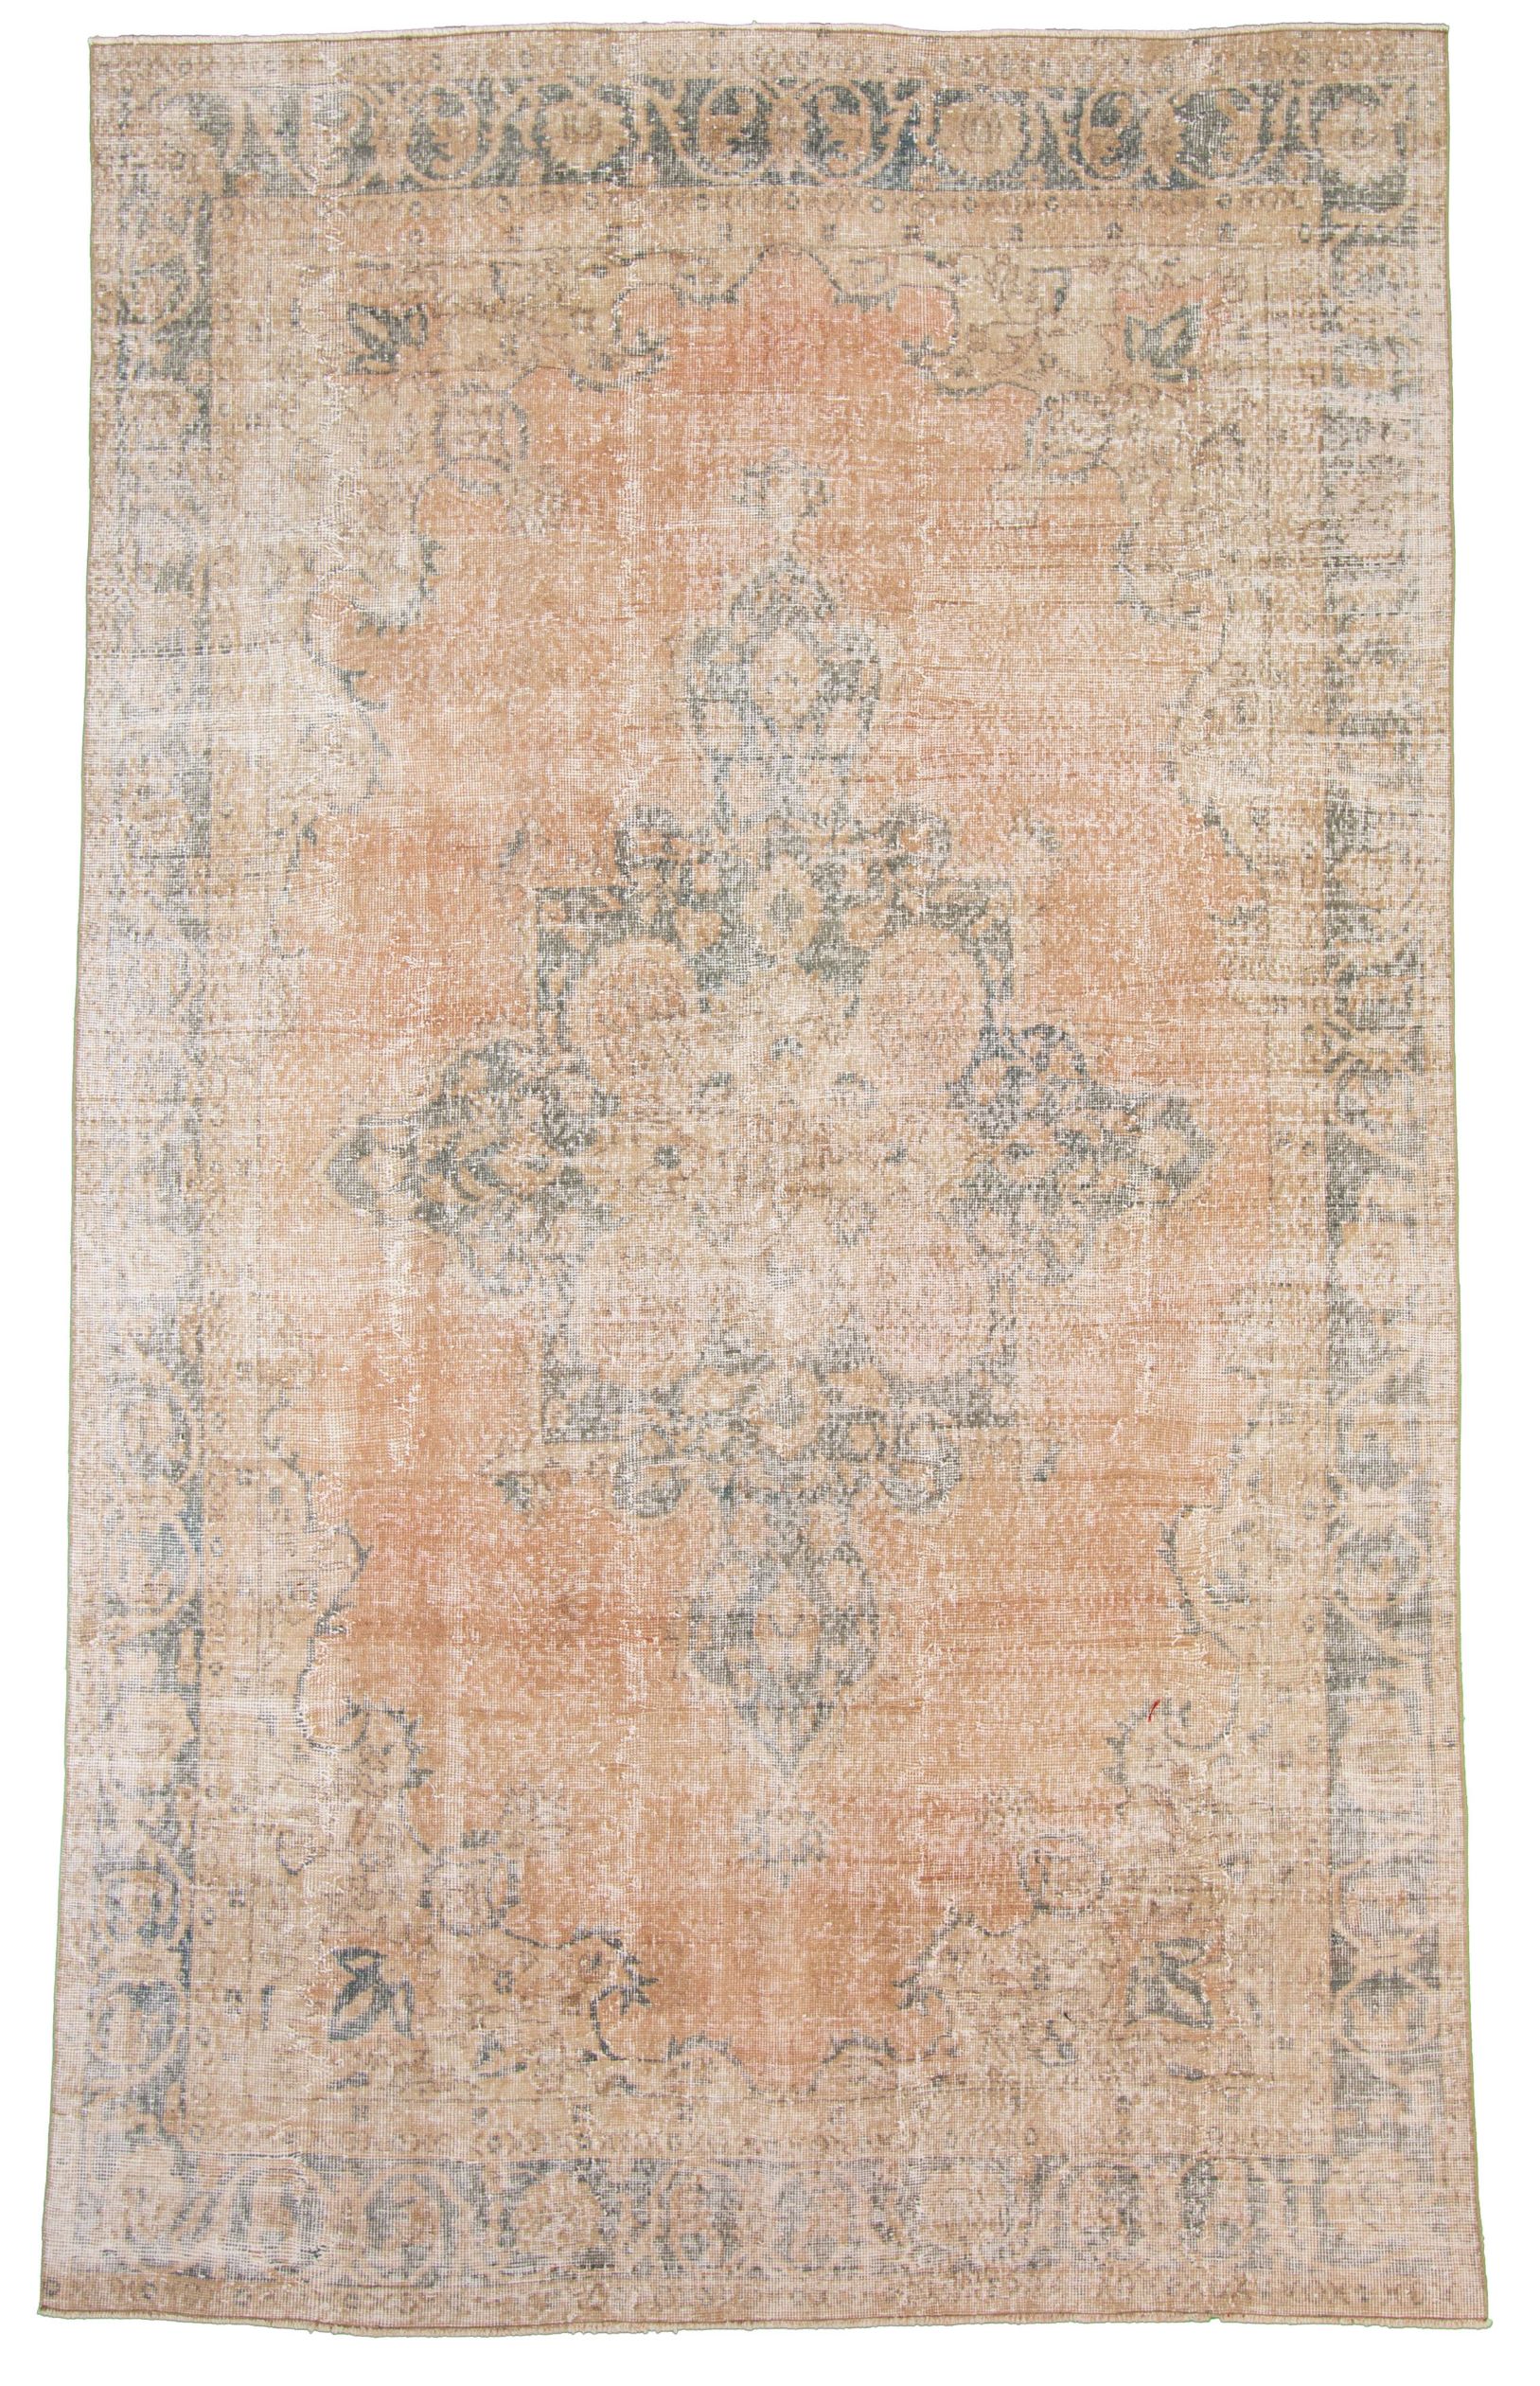 Hand-knotted Antalya Vintage   Rug 9'10" x 6'8"  Size: 6'8" x 9'10"  